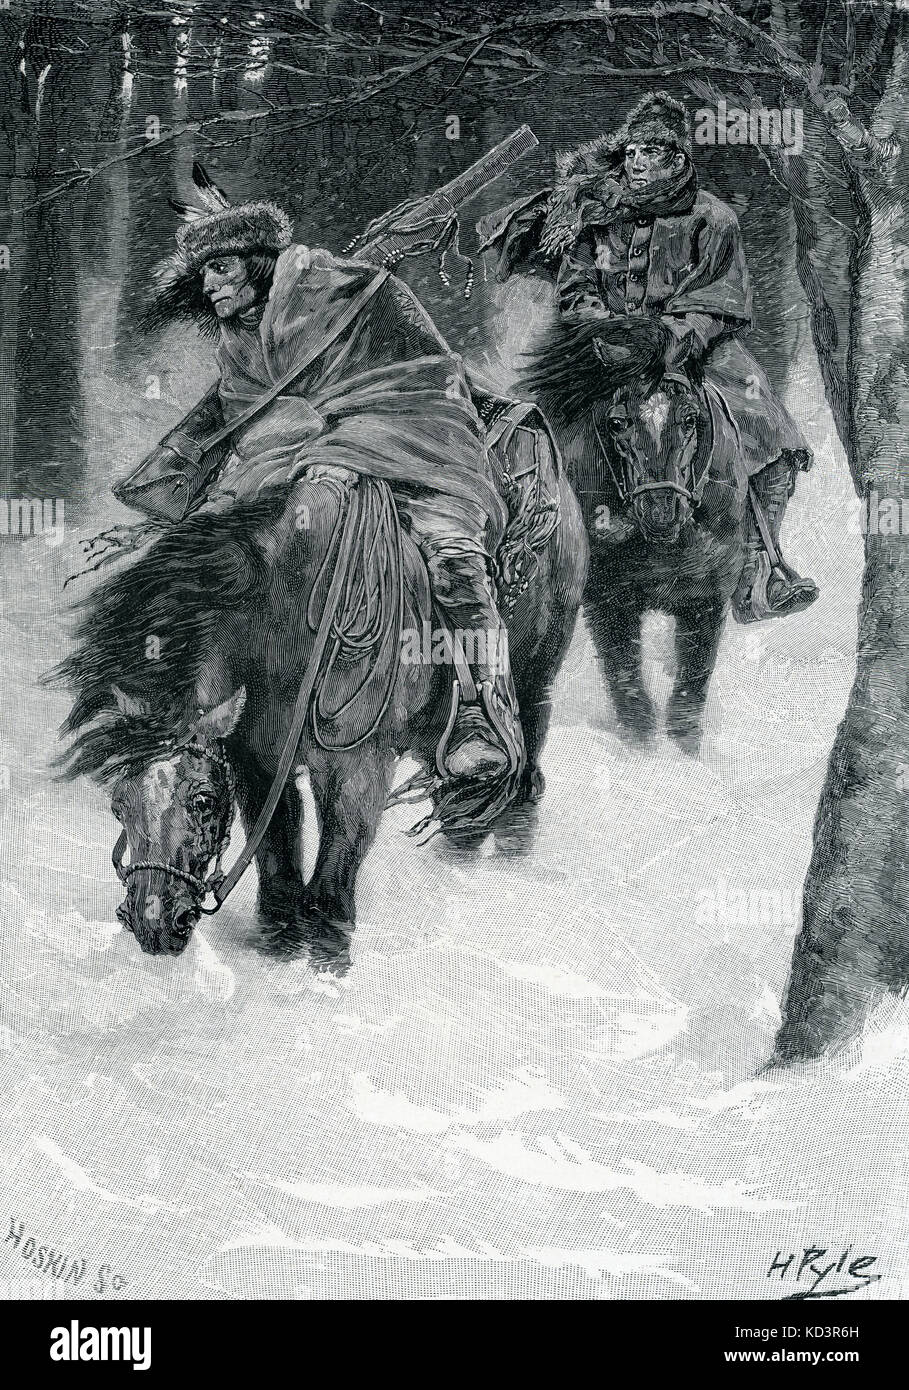 Daniel Boone's exploration of Tennessee, 1700s. Illustration by Howard Pyle, 1886 Stock Photo